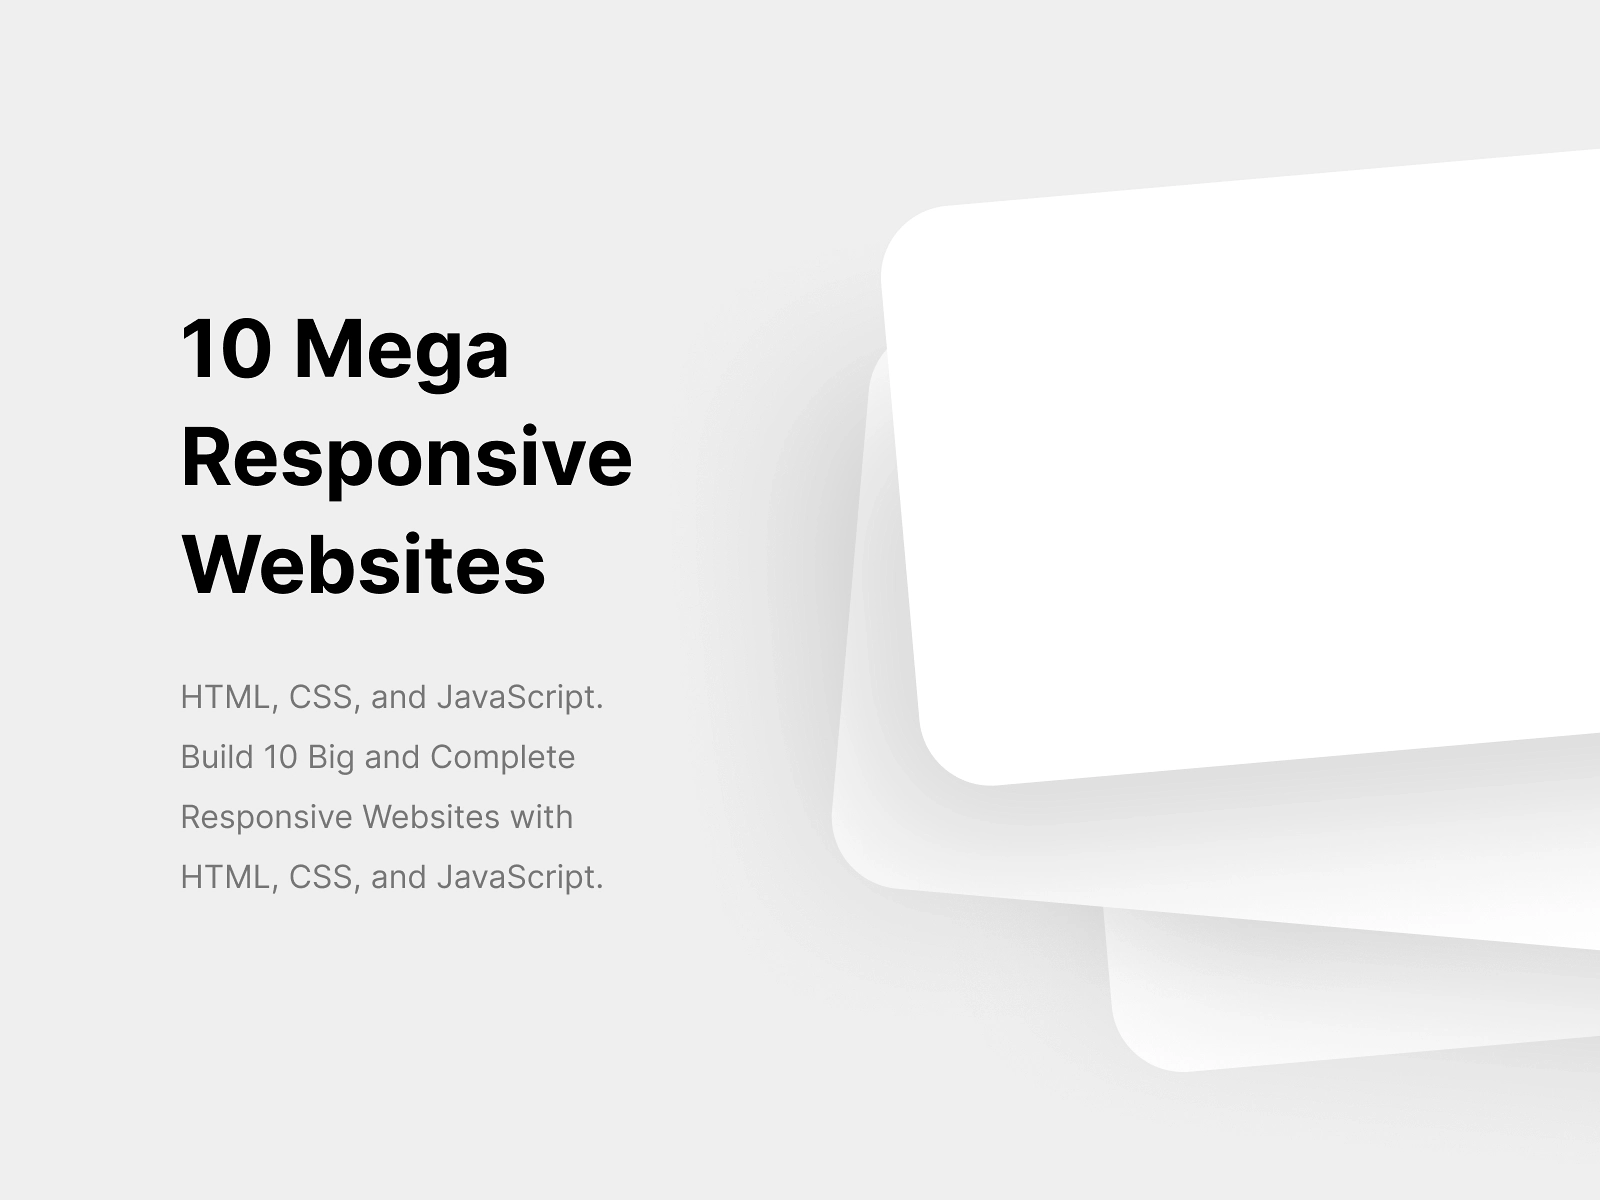 [VIP] 10 Mega Responsive Websites with HTML, CSS, and JavaScript